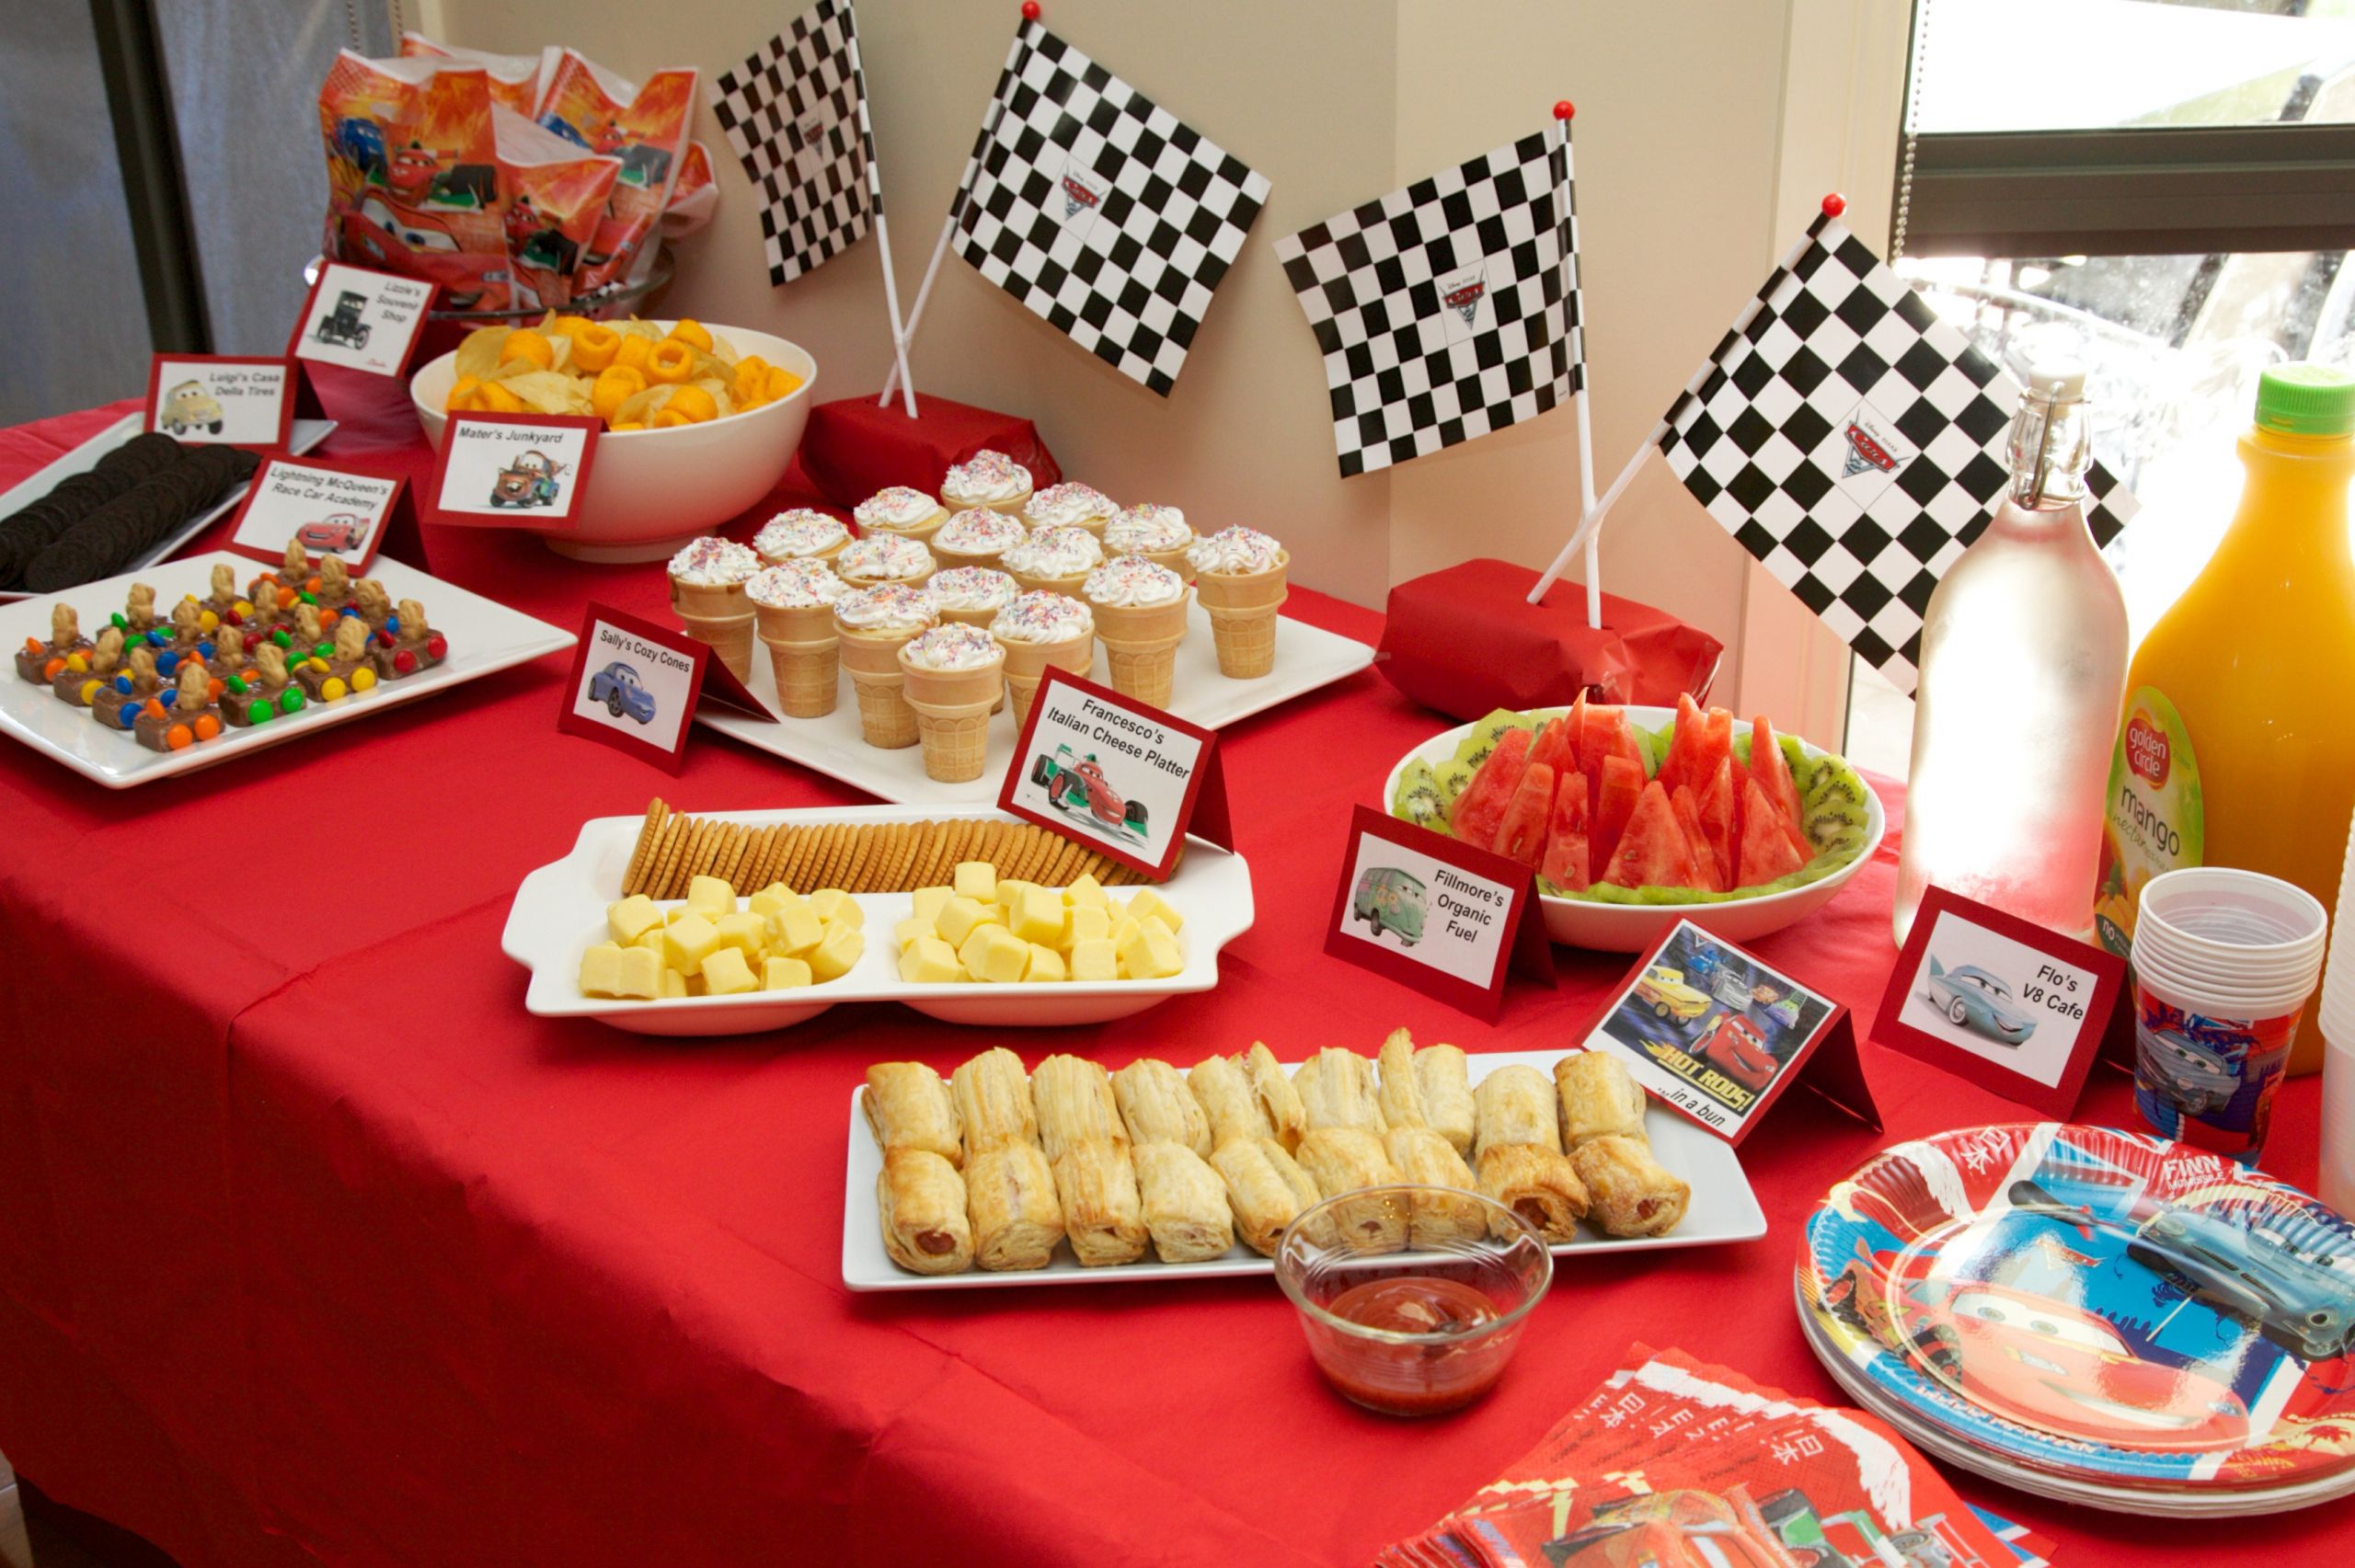 Kids Birthday Party Food Idea
 How to throw a BIG kids birthday party on a small bud